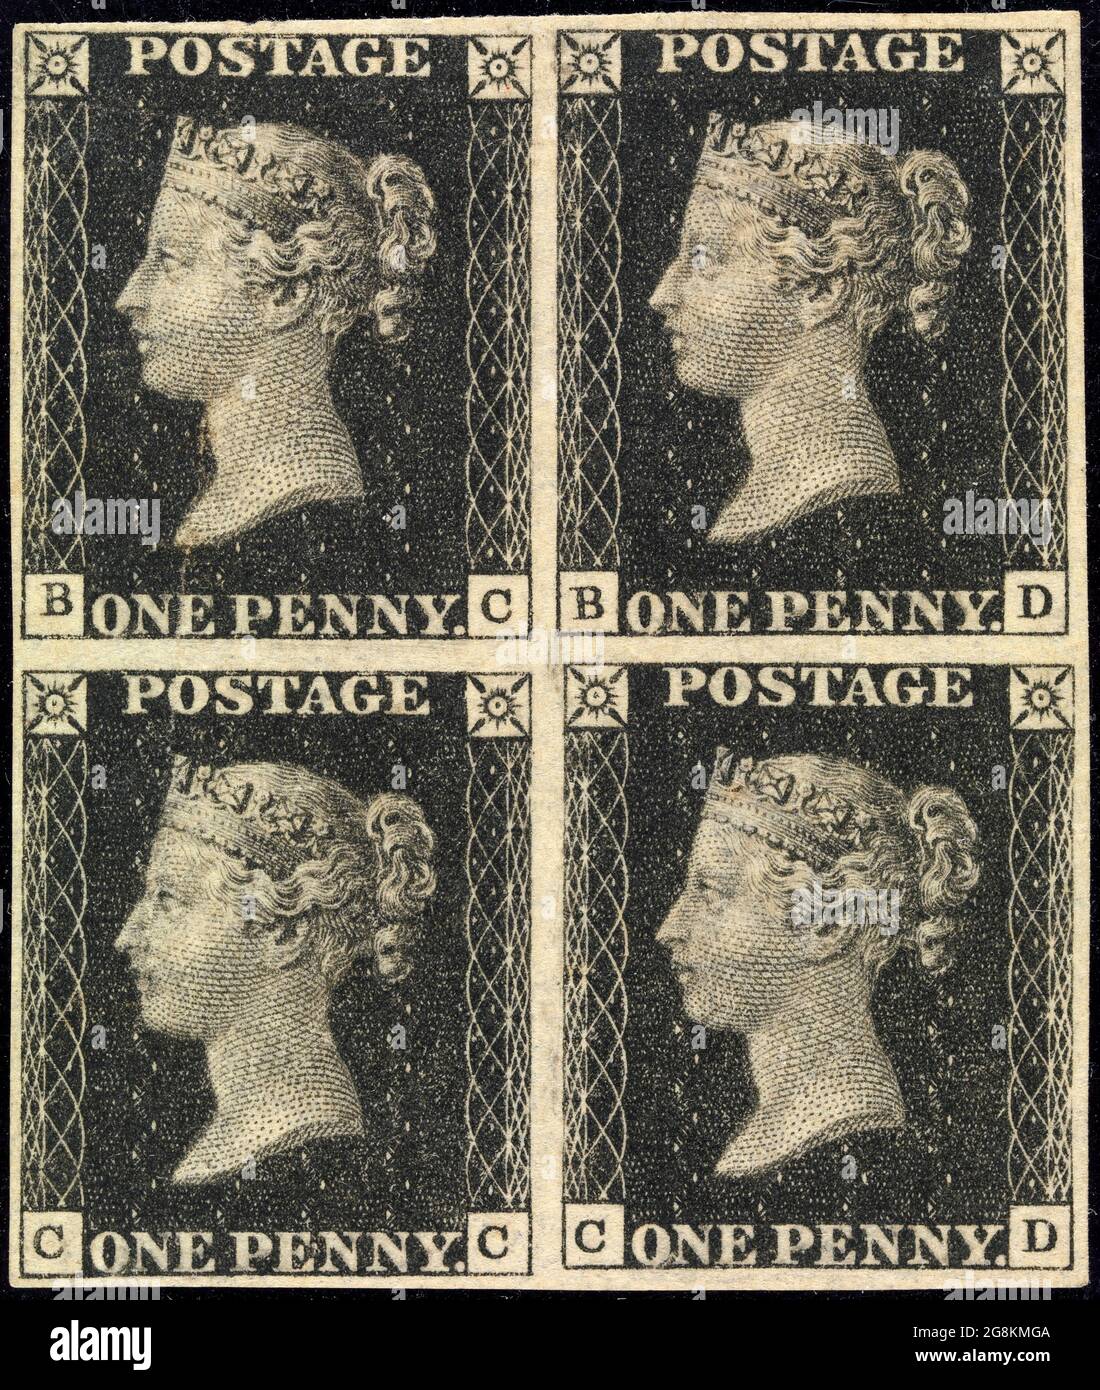 Unused block of four 'Penny Black' postage stamps of Queen Victoria issued May 6, 1840 After a design by William Wyon Stock Photo